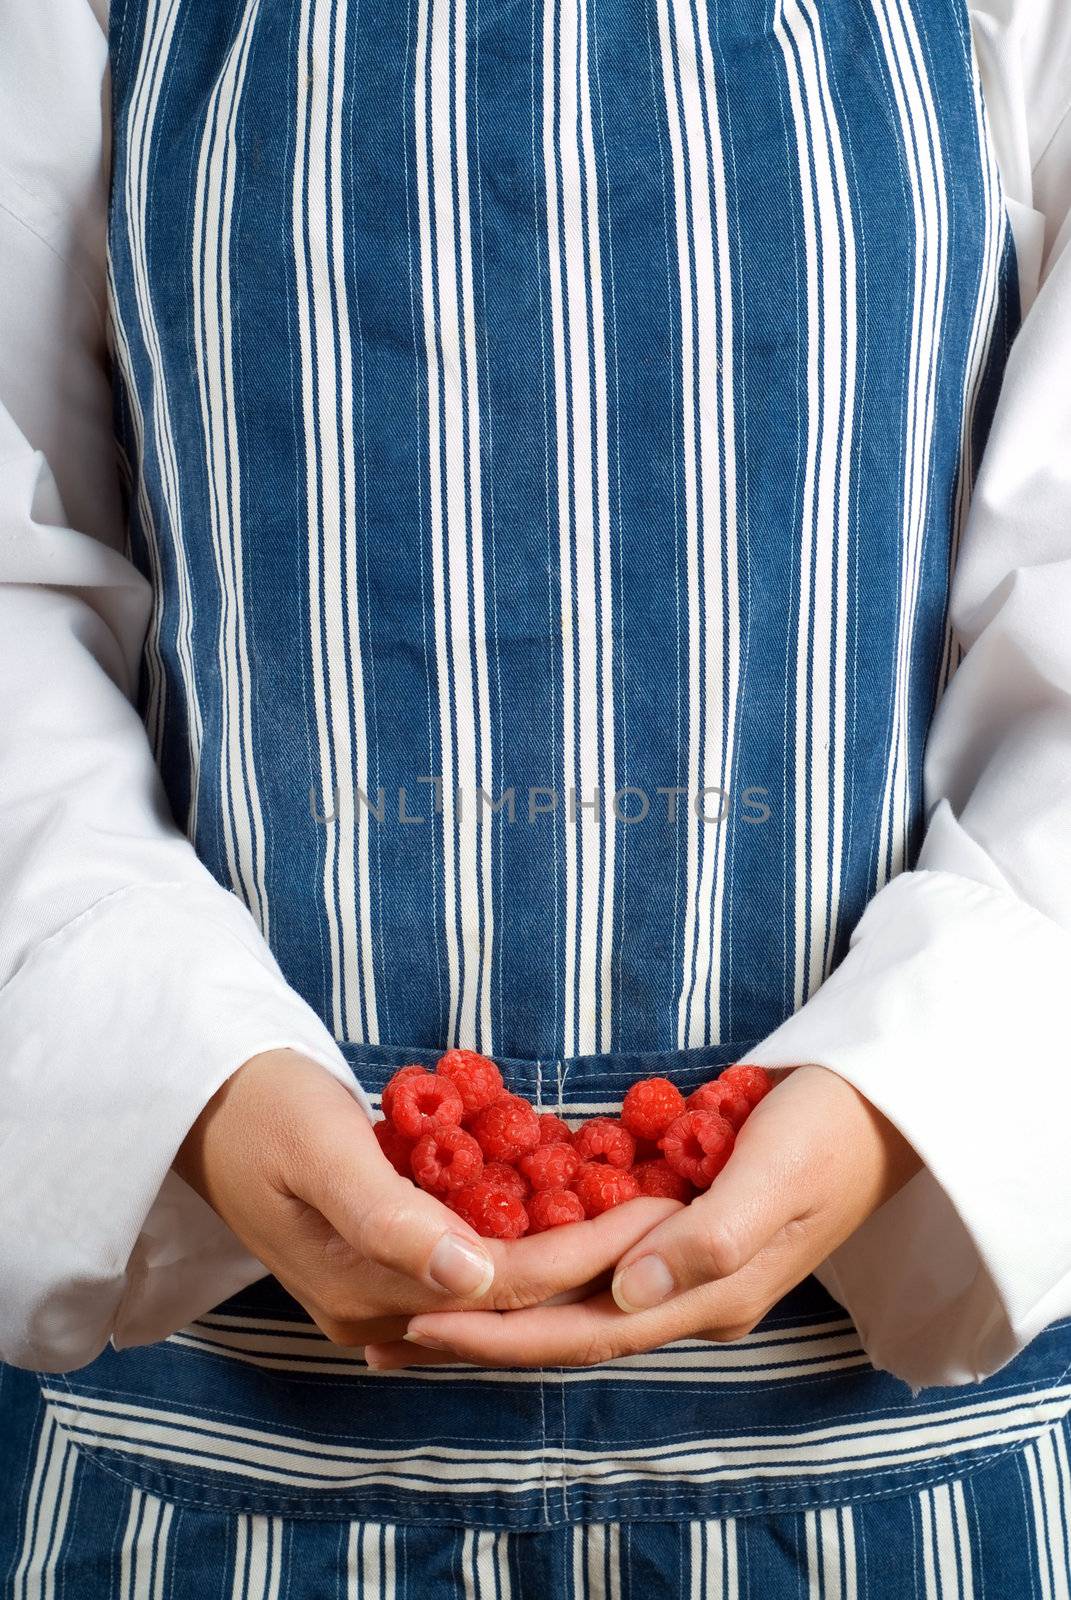 Woman cook or chef holding raspberries in her hands